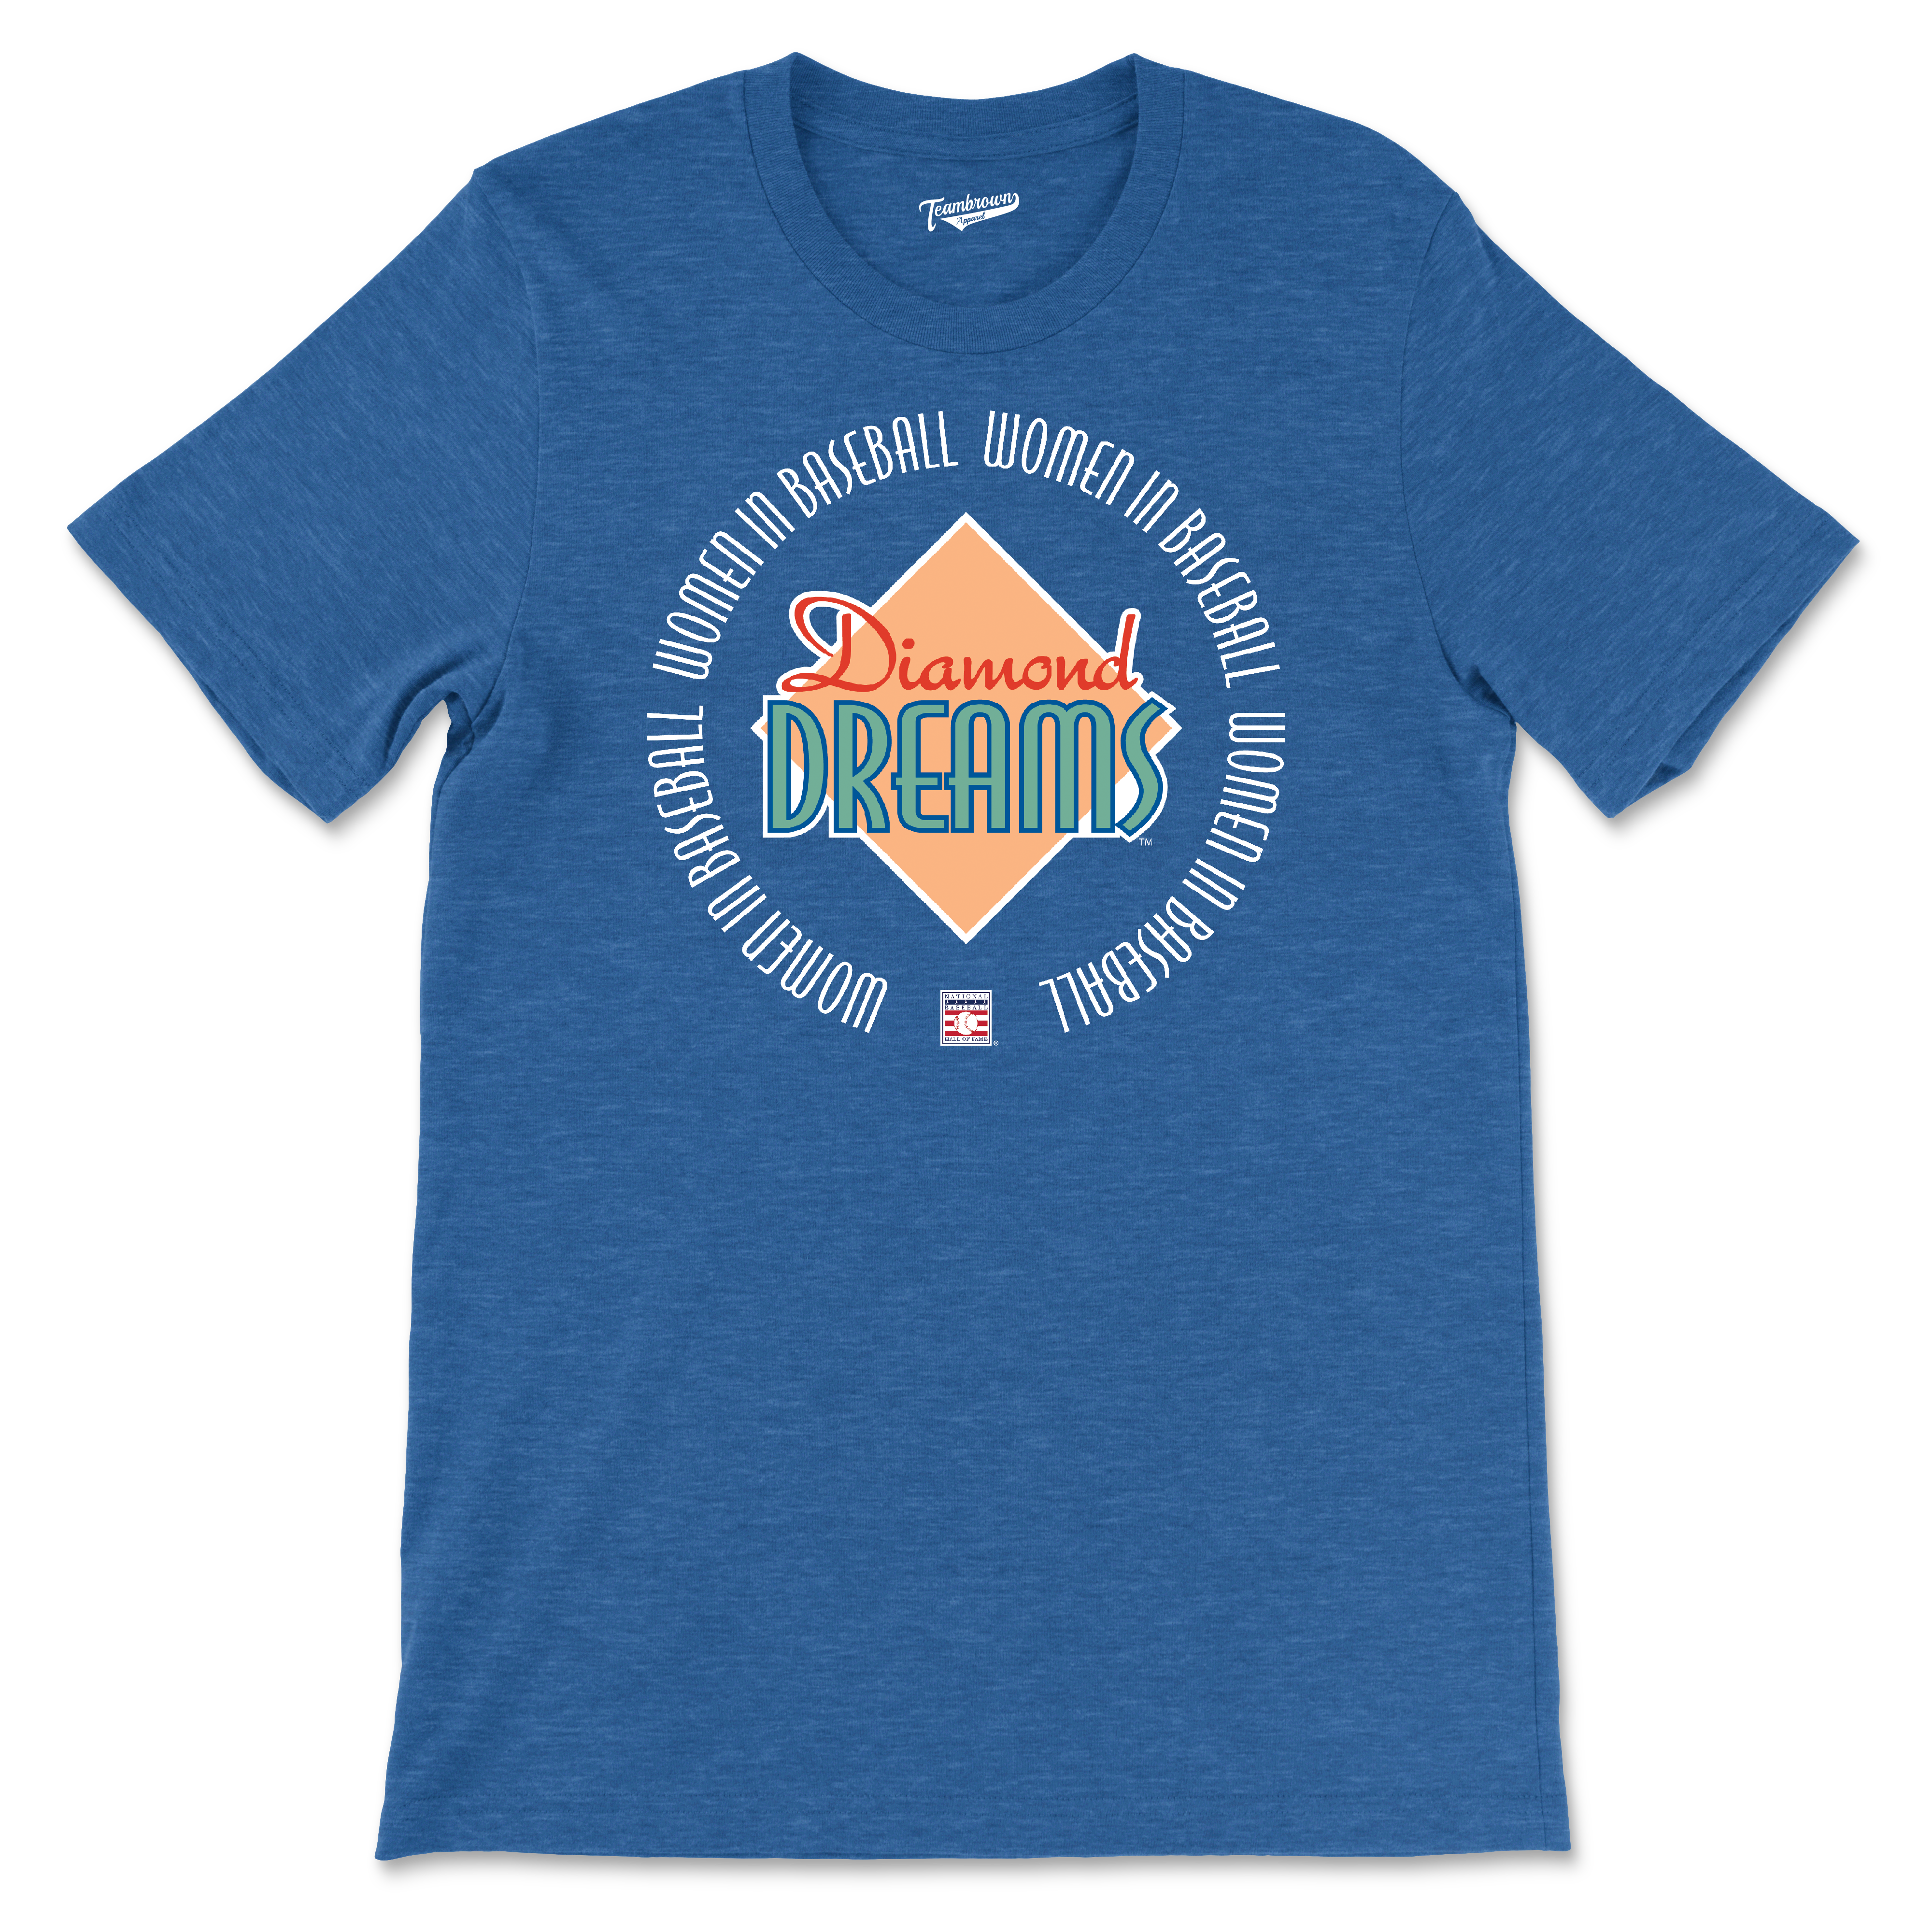 Diamond Dreams - Women In Baseball - Unisex T-Shirt | Officially Licensed - National Baseball Hall of Fame and Museum